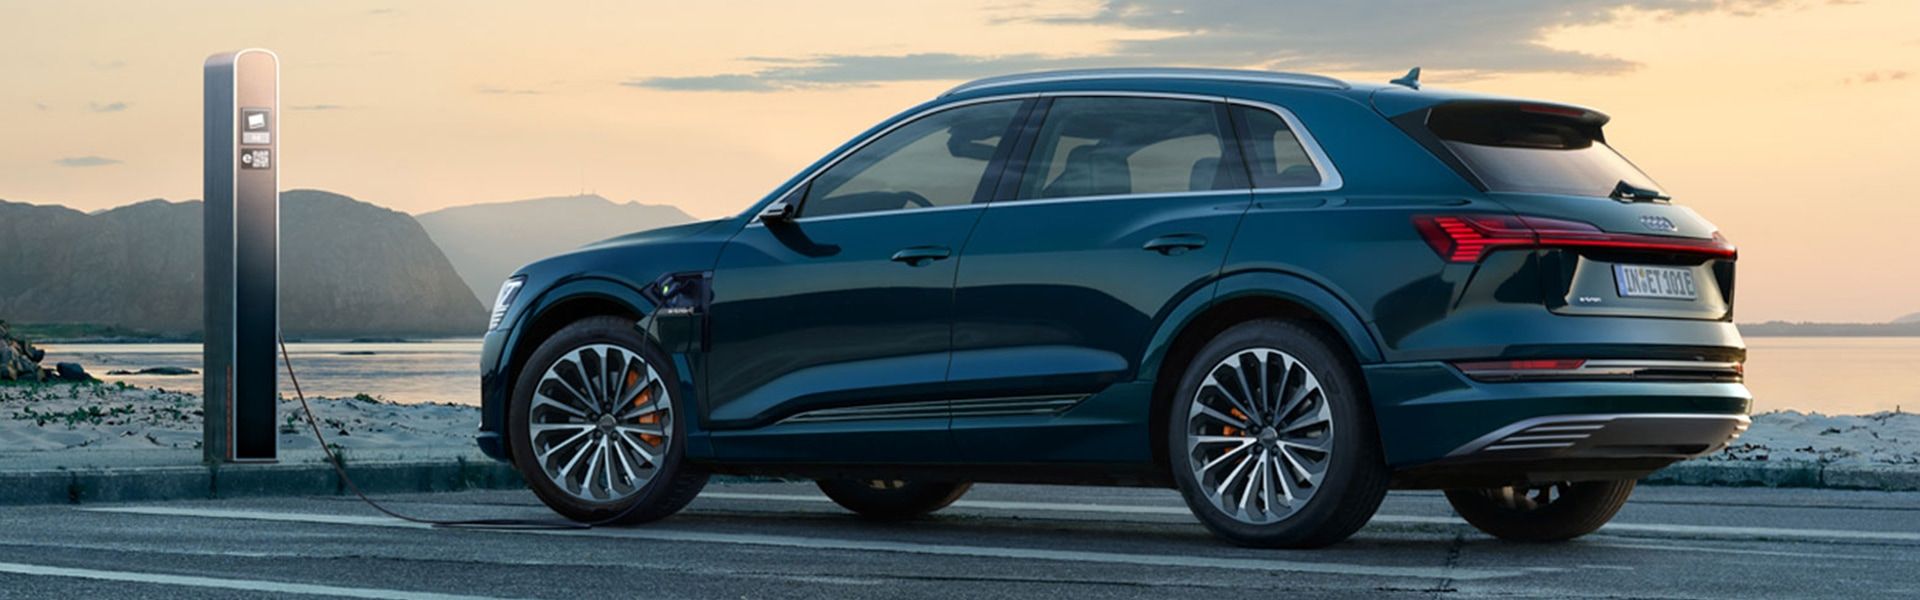 The Audi e-tron Quattro joins in on sustainable luxury automobiles